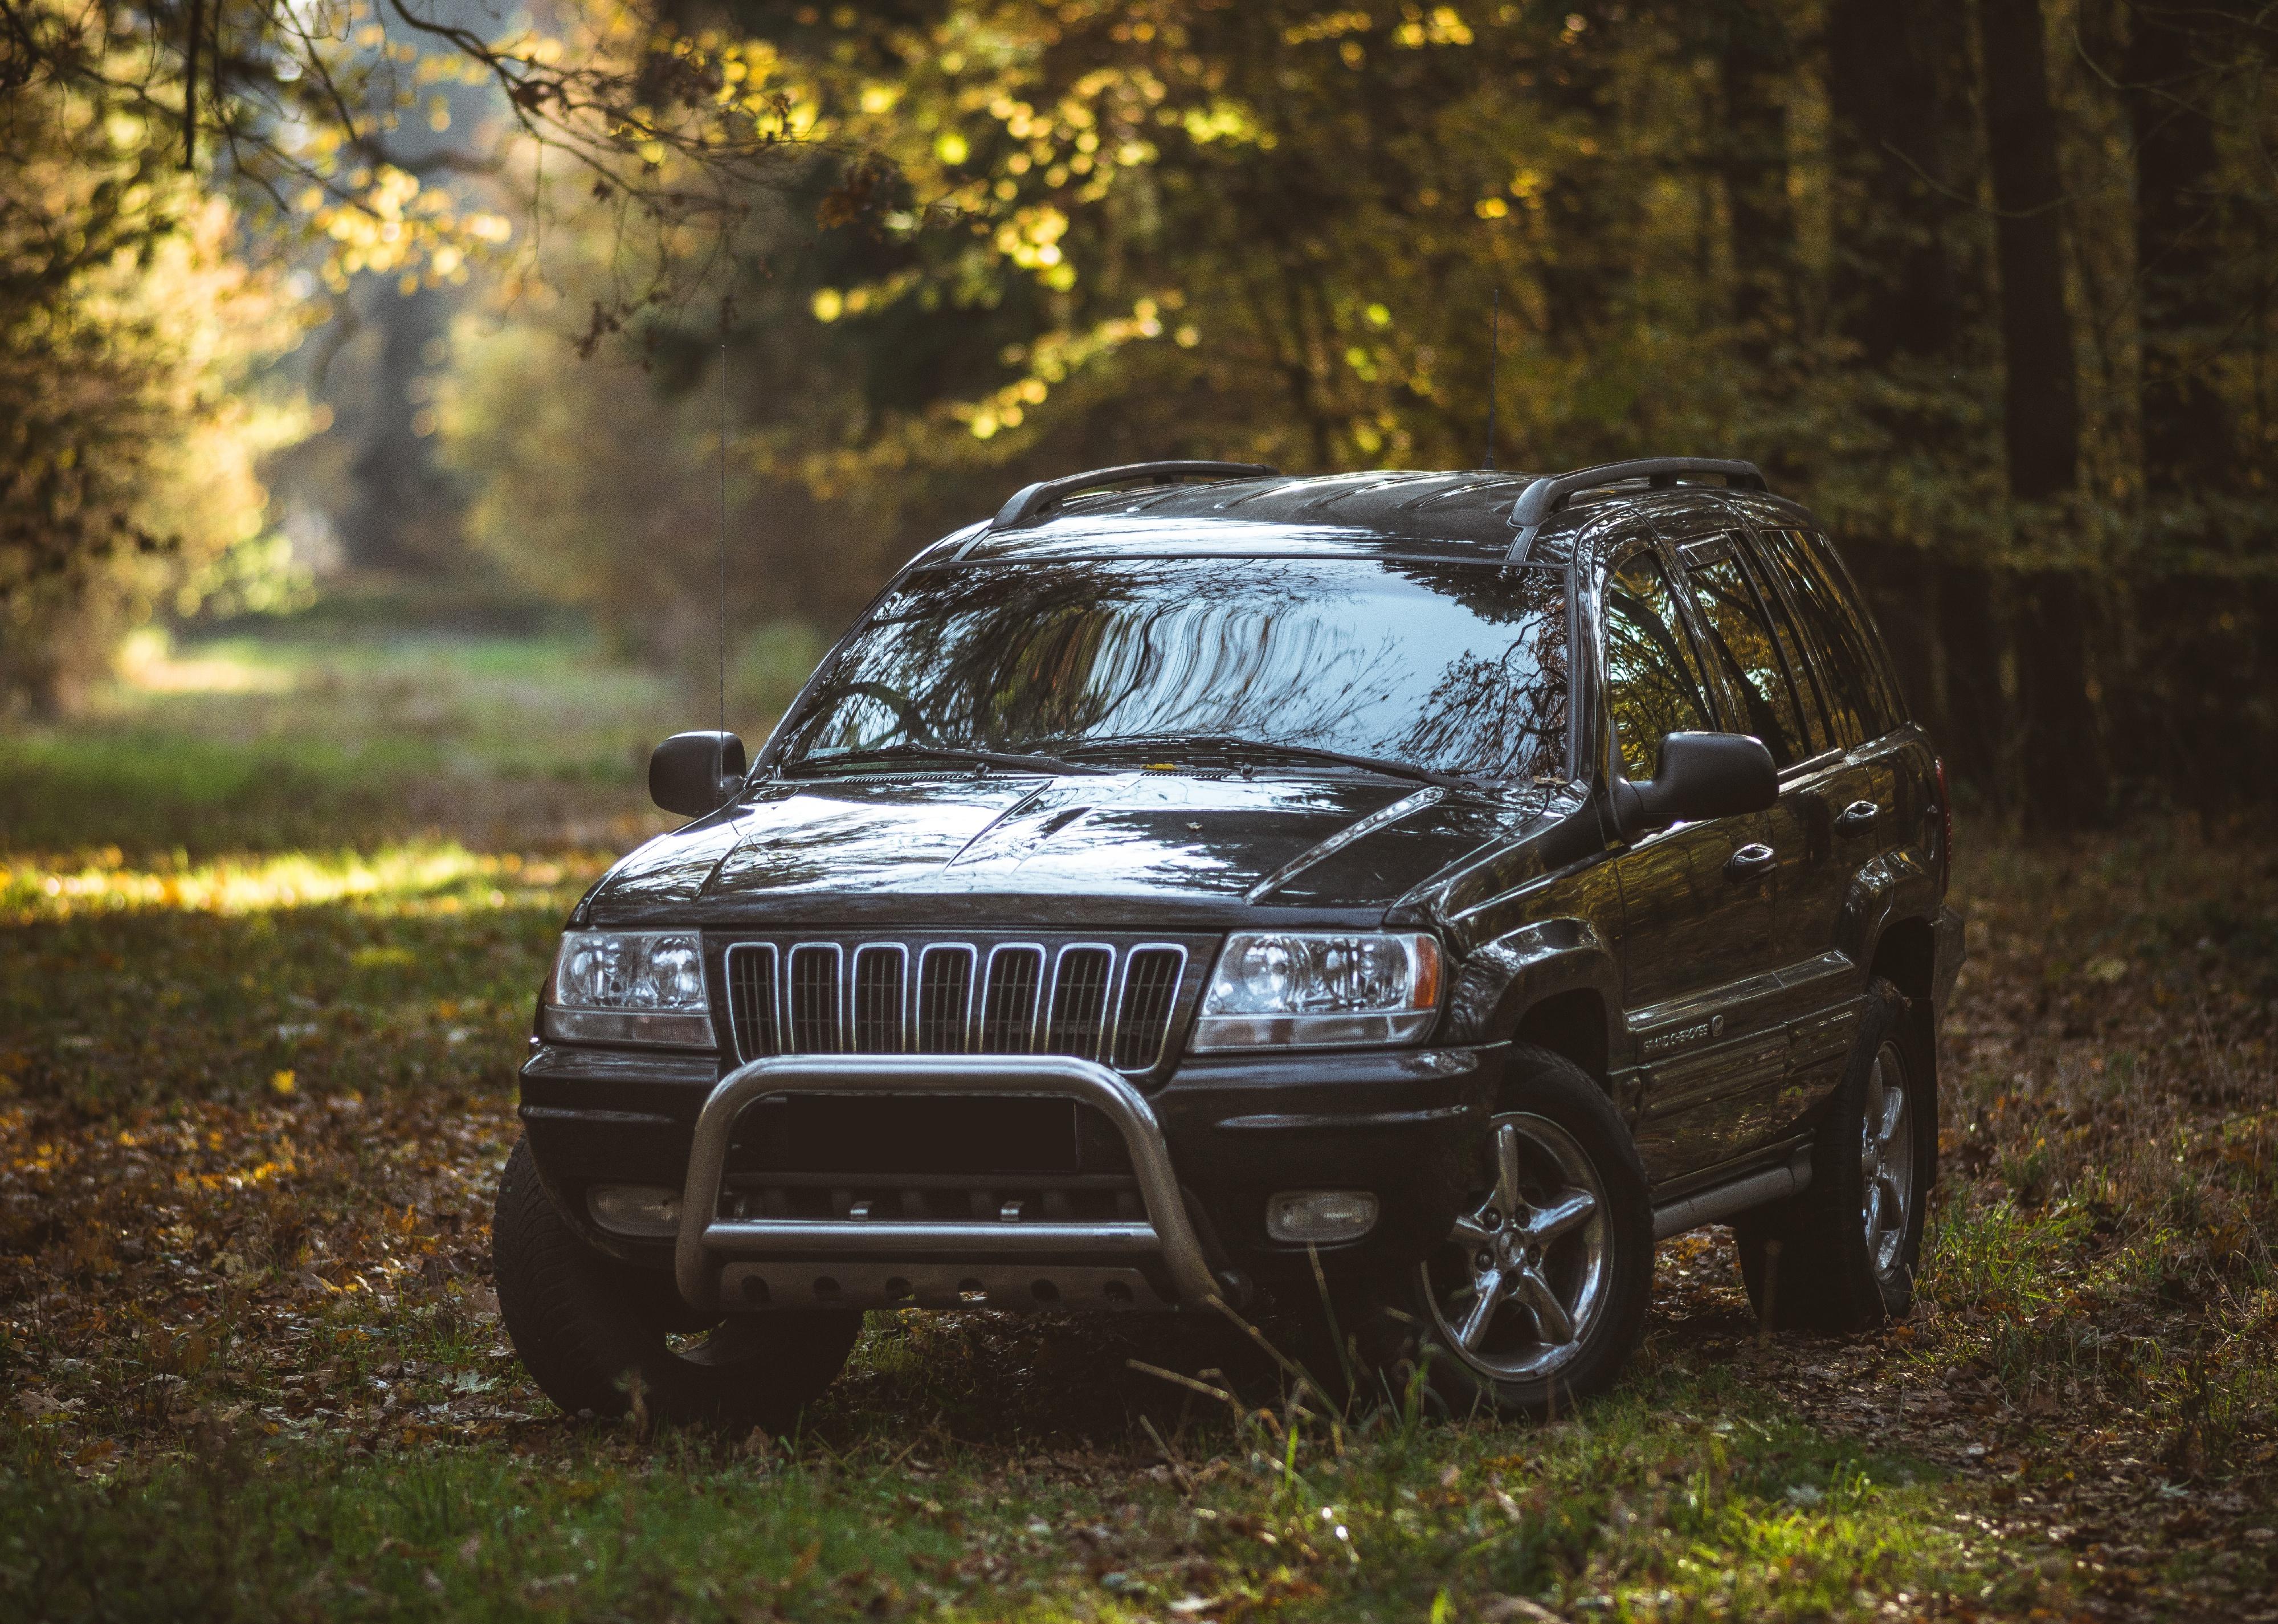 A Jeep Grand Cherokee surrounded by trees.